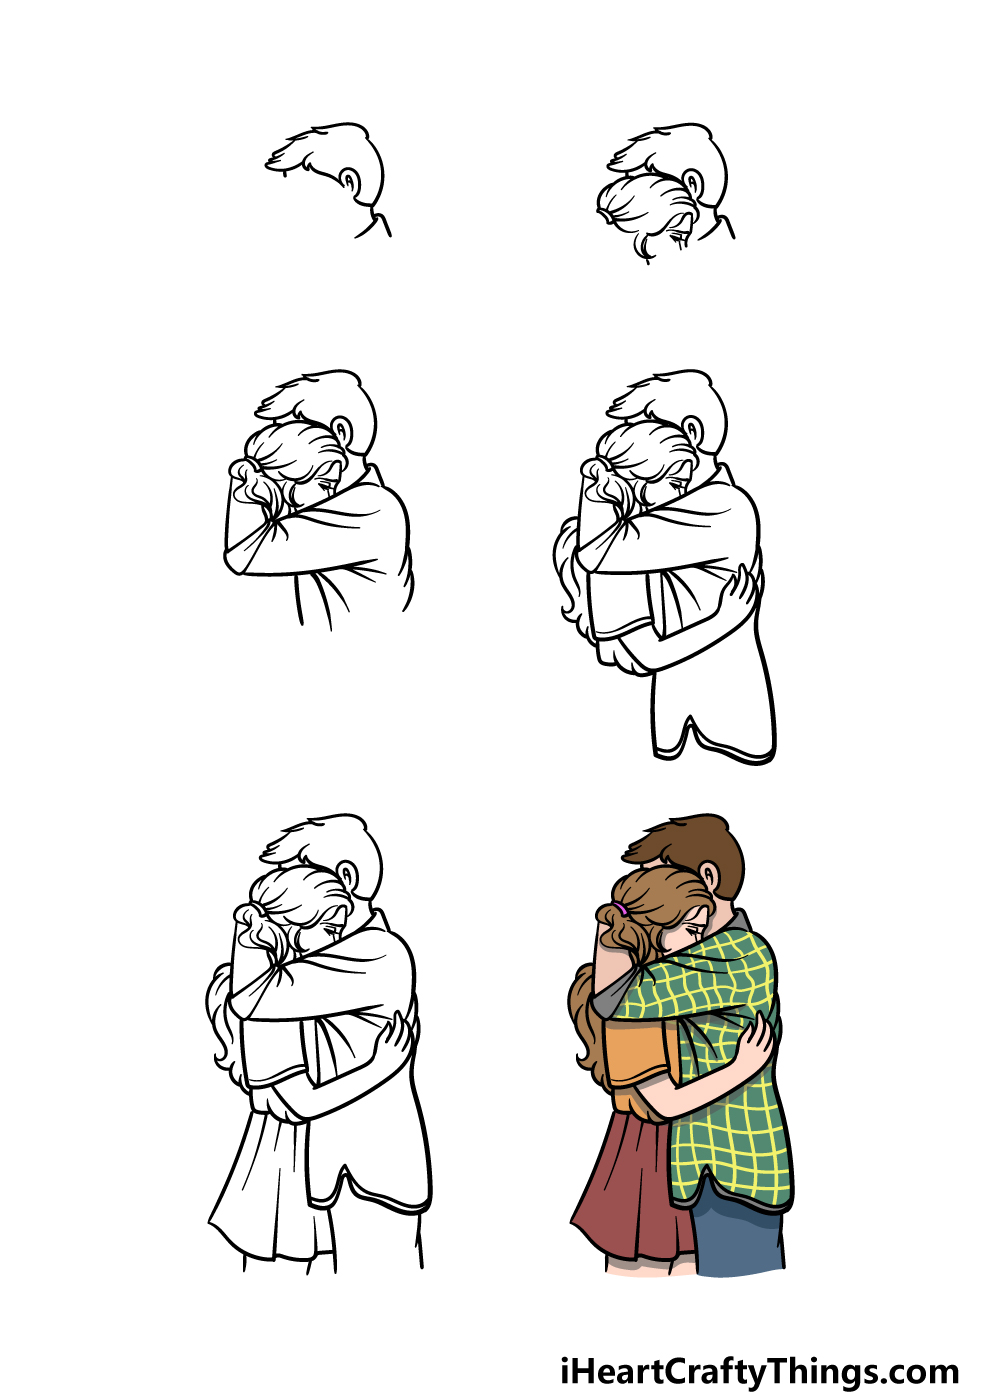 how to draw people hugging in 6 steps